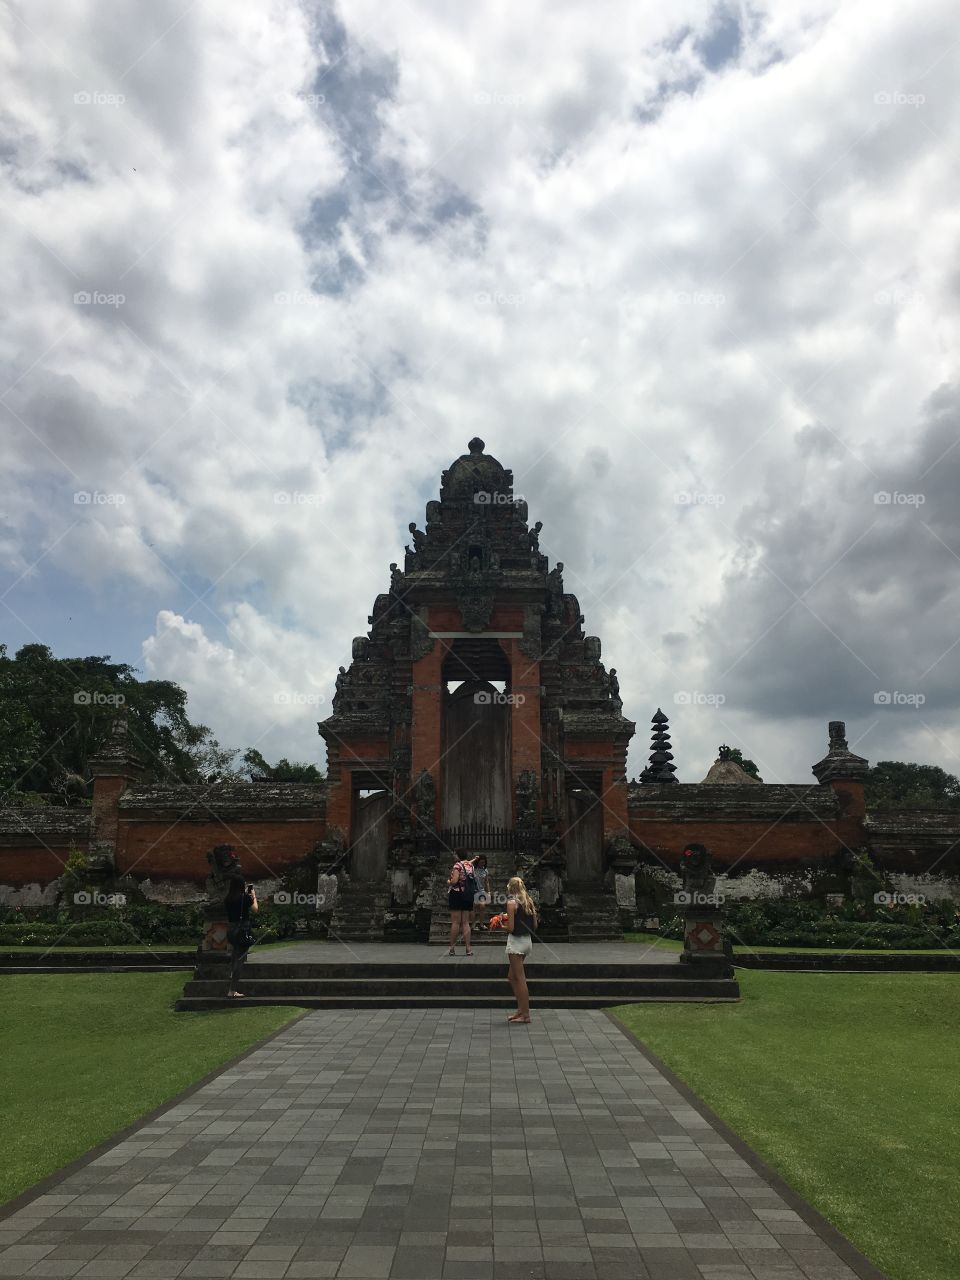 Temple in bali Indonesia,Royal temple 